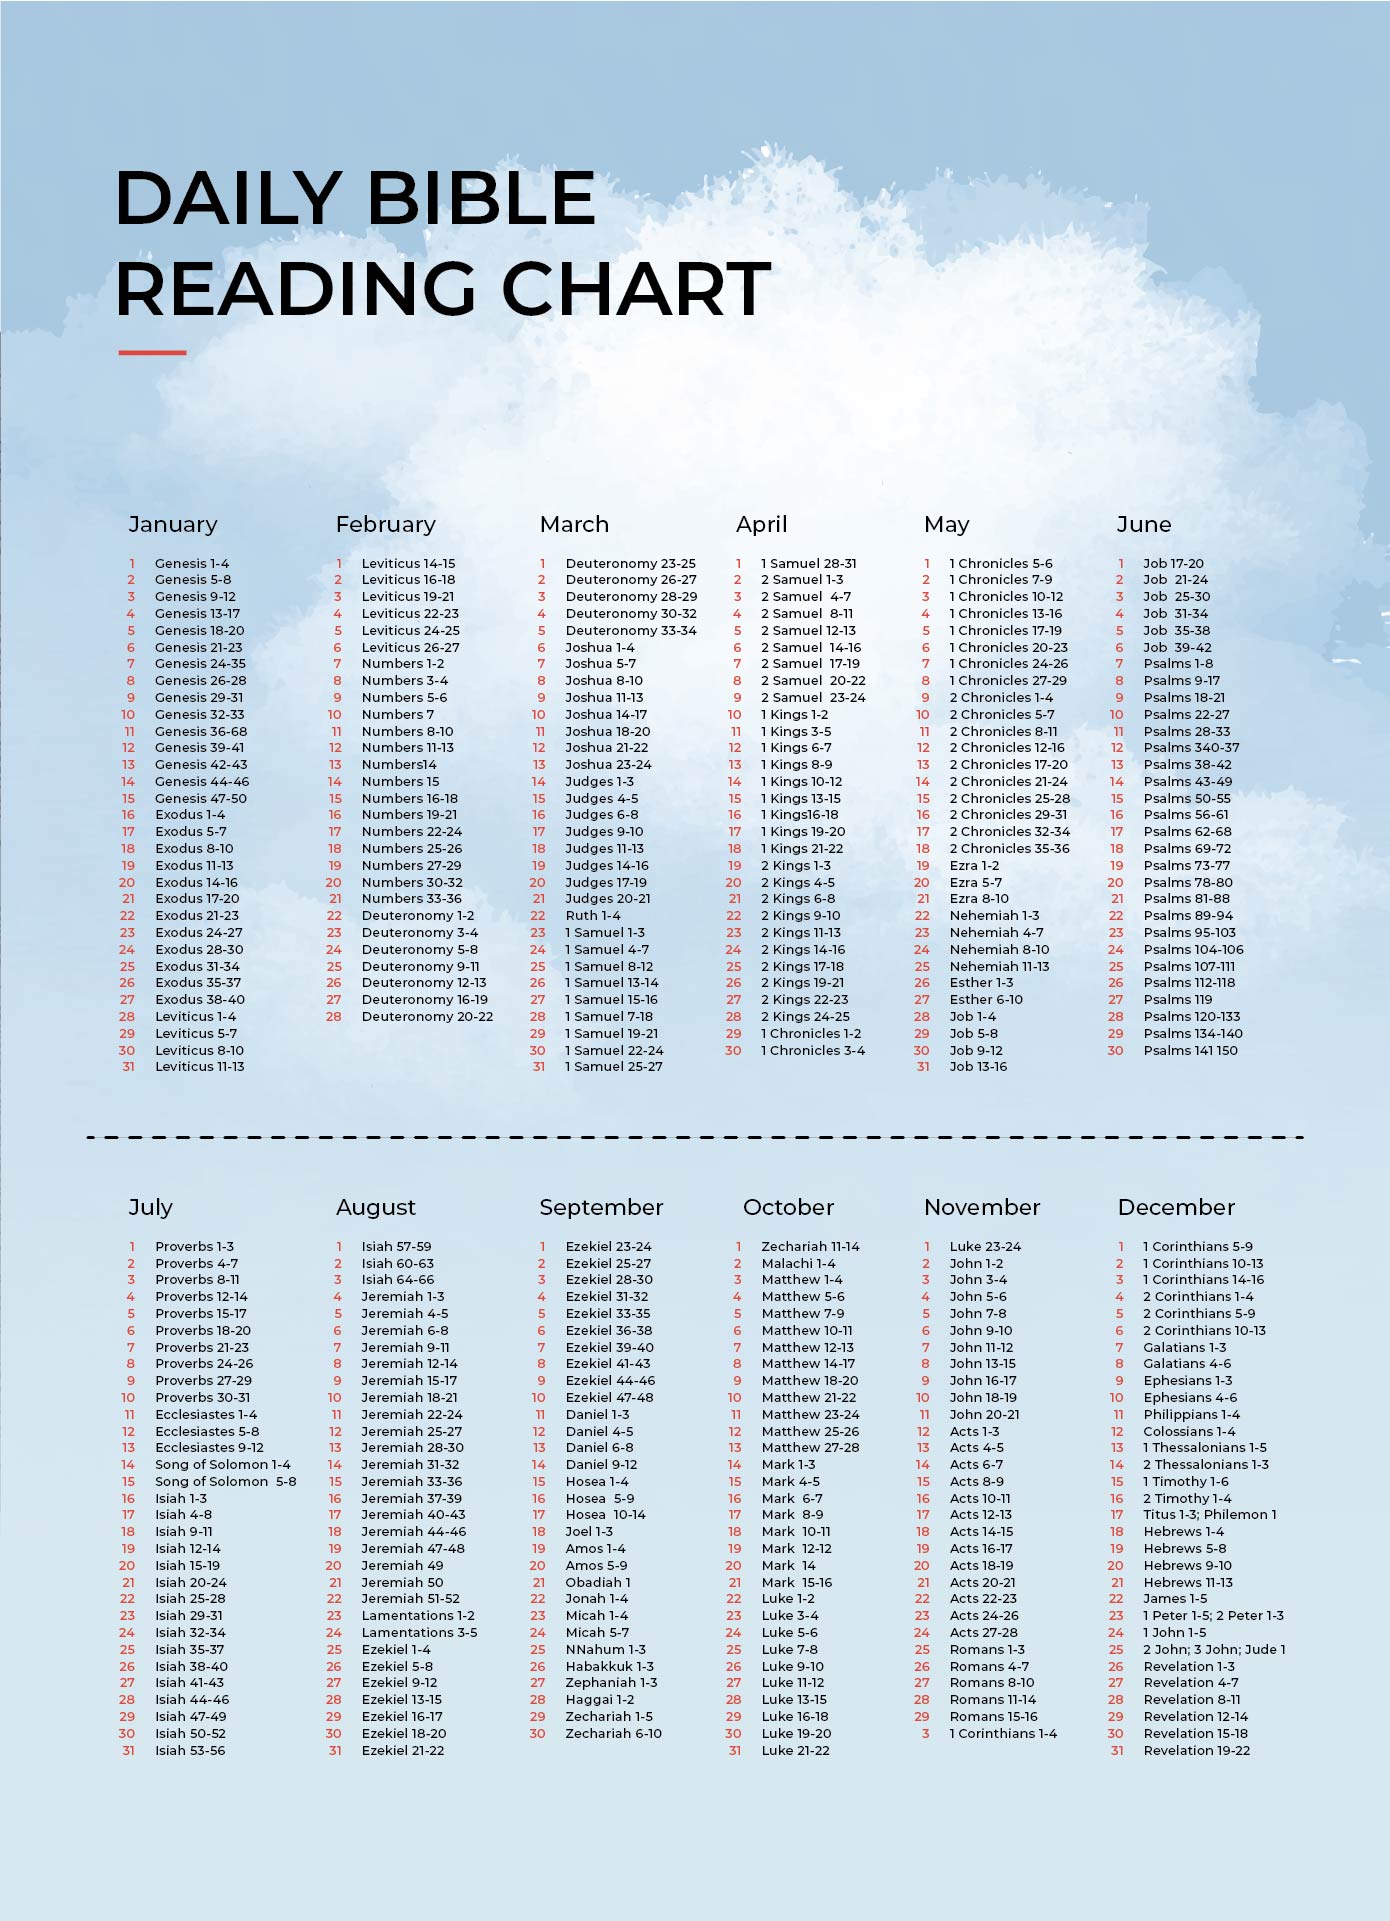 Daily Bible Reading Chart